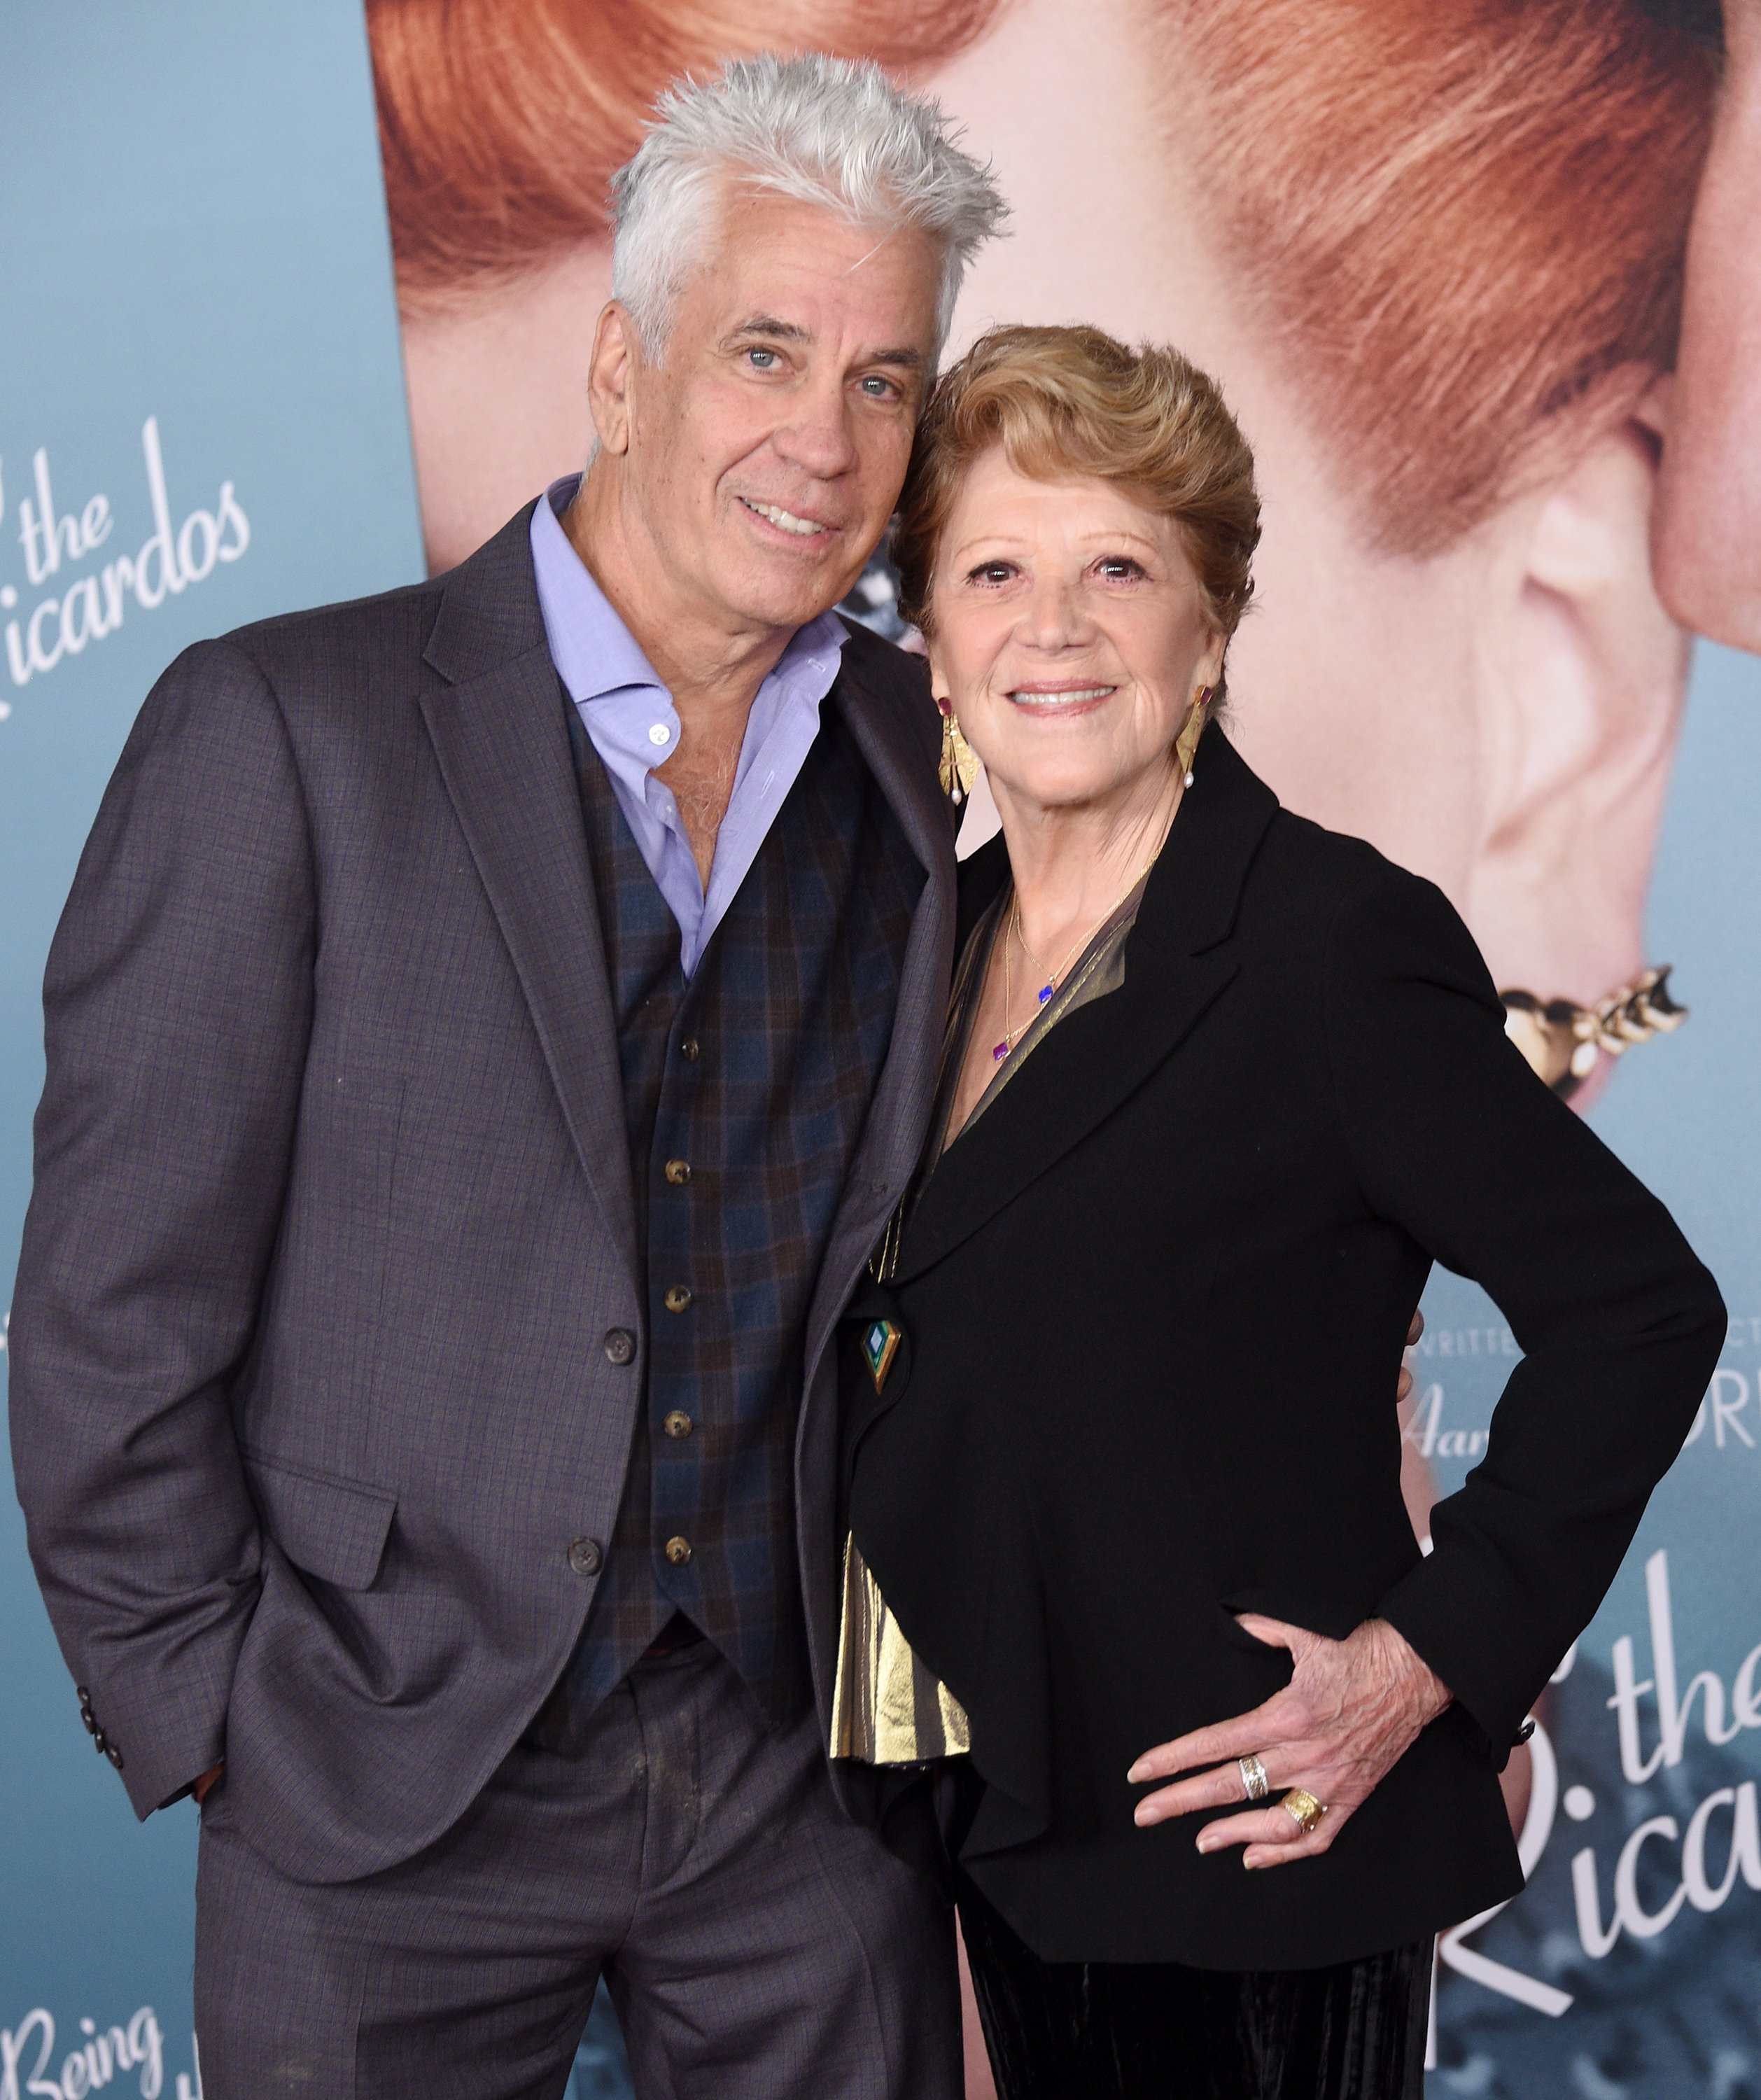 Steve Bakunas and Linda Lavin attend the Los Angeles Premiere Of Amazon Studios' "Being The Ricardos" at Academy Museum of Motion Pictures on December 06, 2021, in Los Angeles, California. | Source: Getty Images